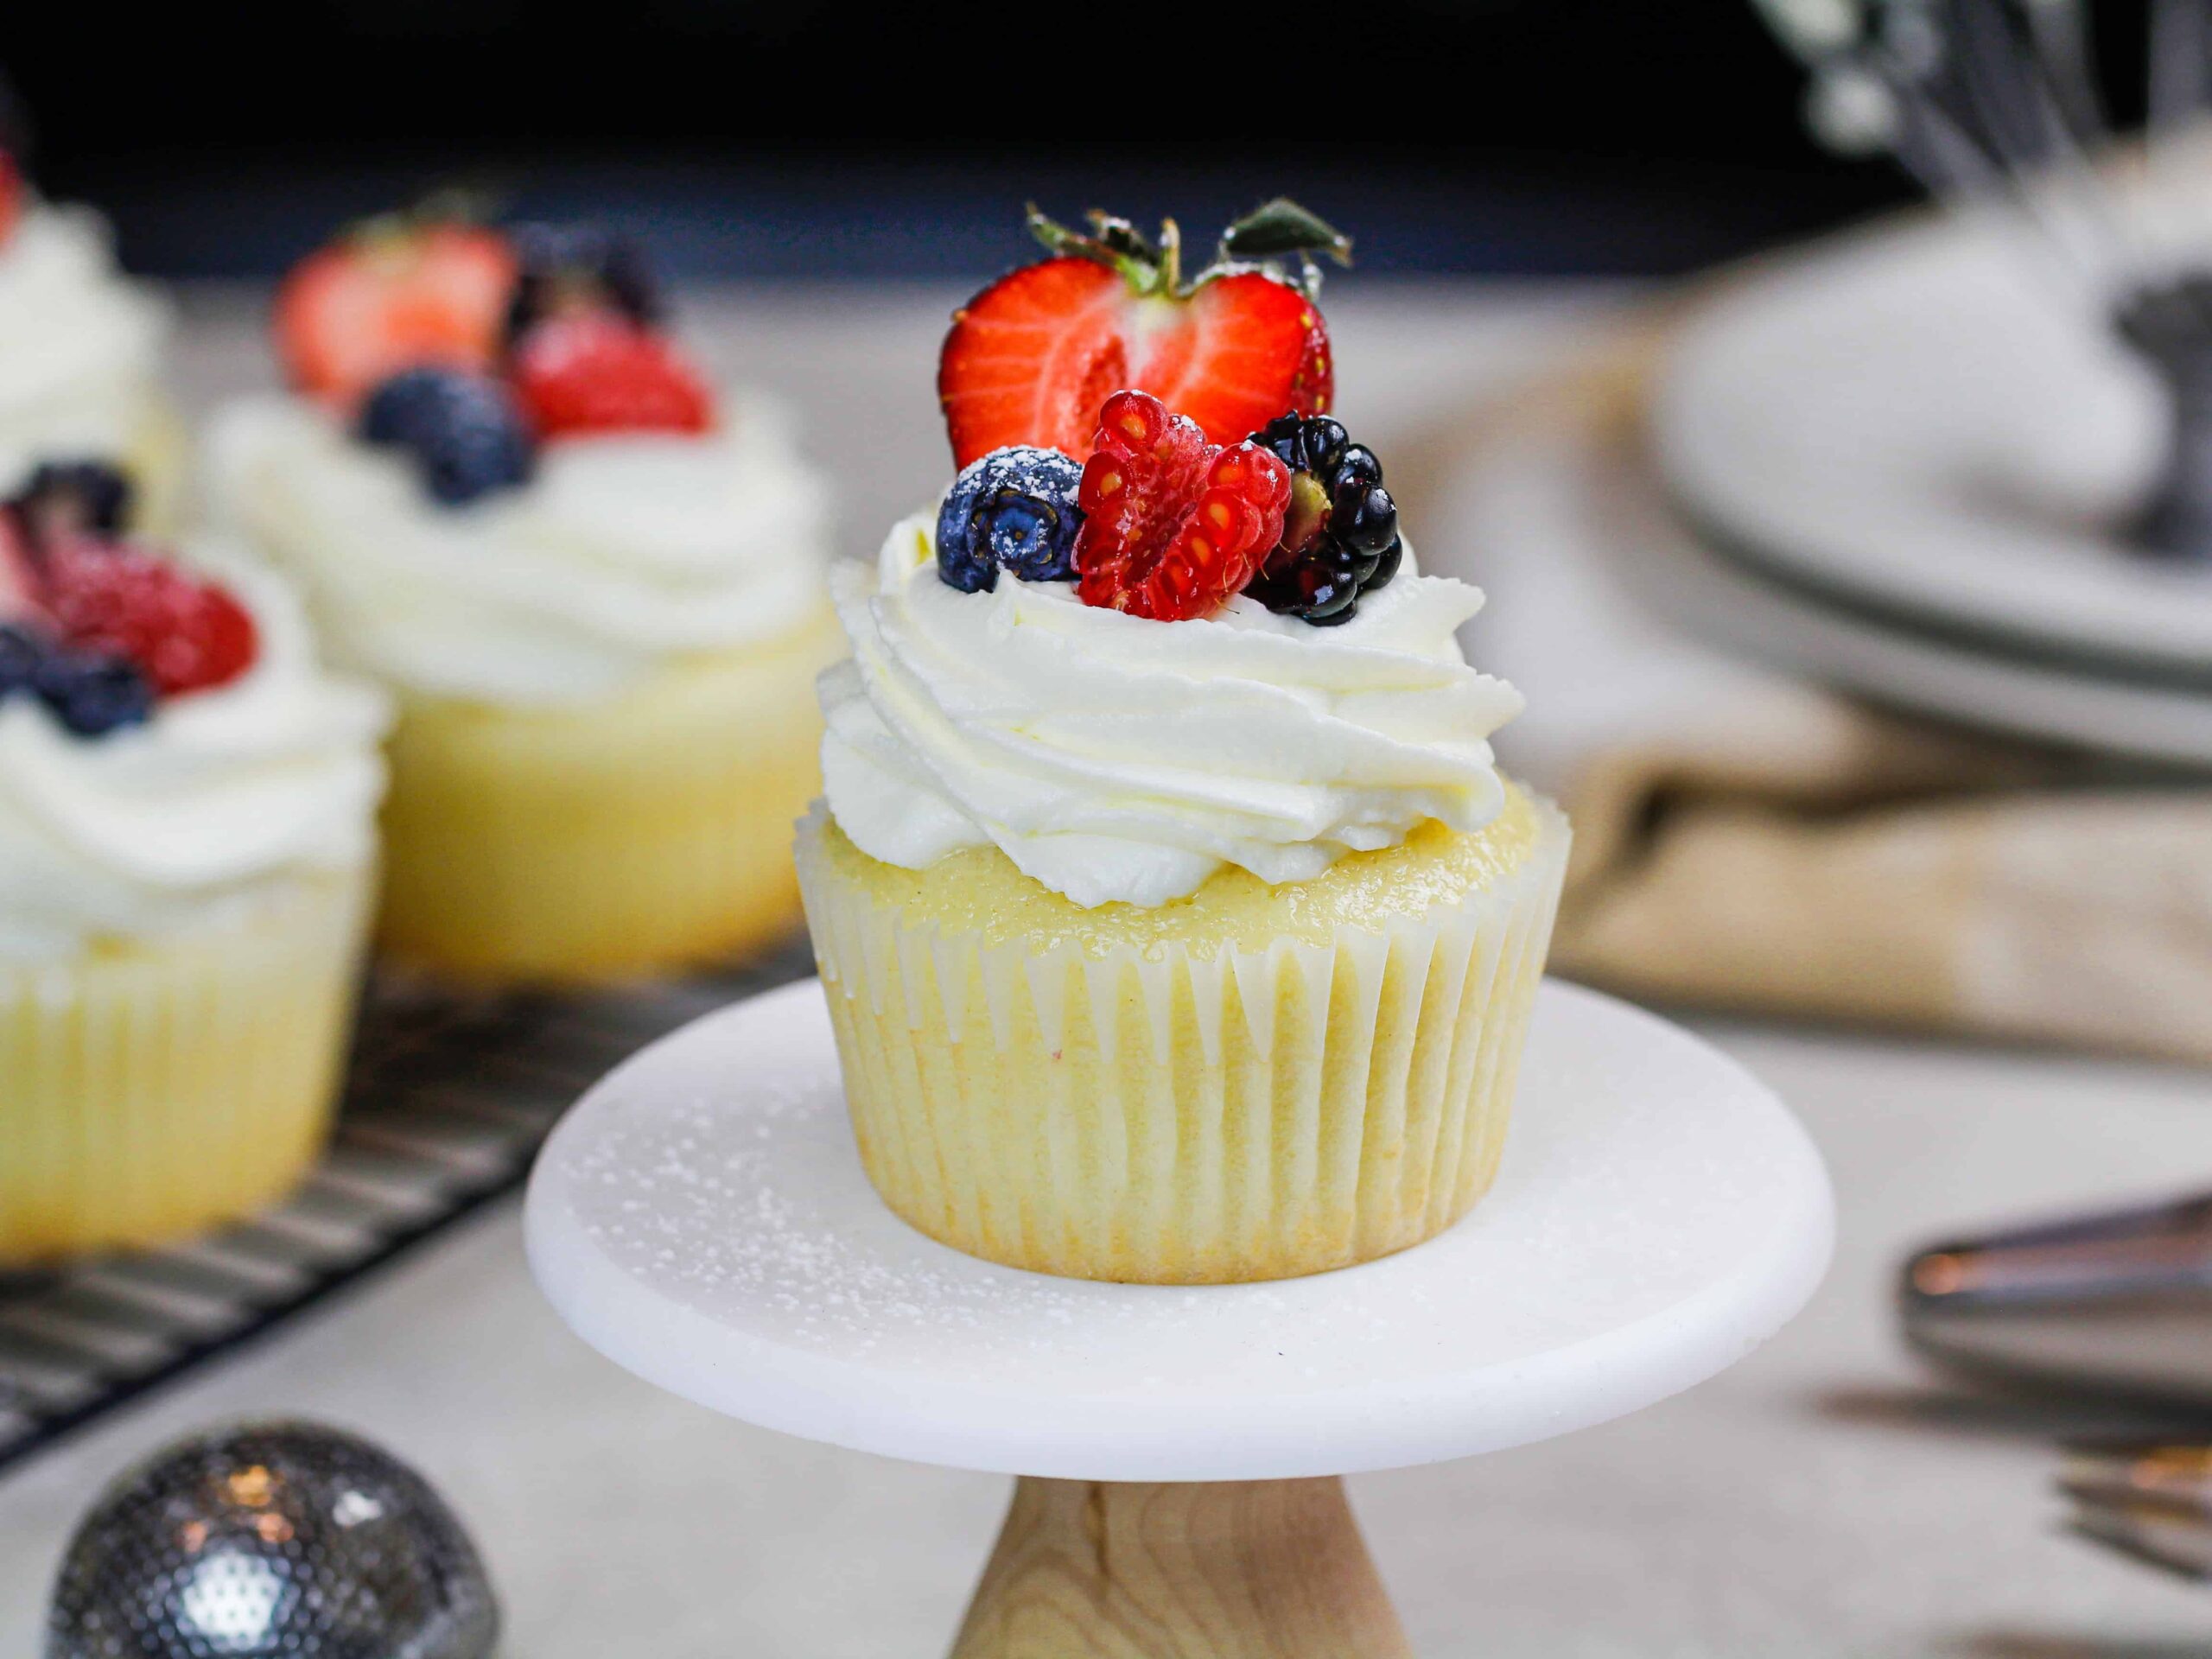 image of cupcakes topped with whipped cream frosting and fresh fruit